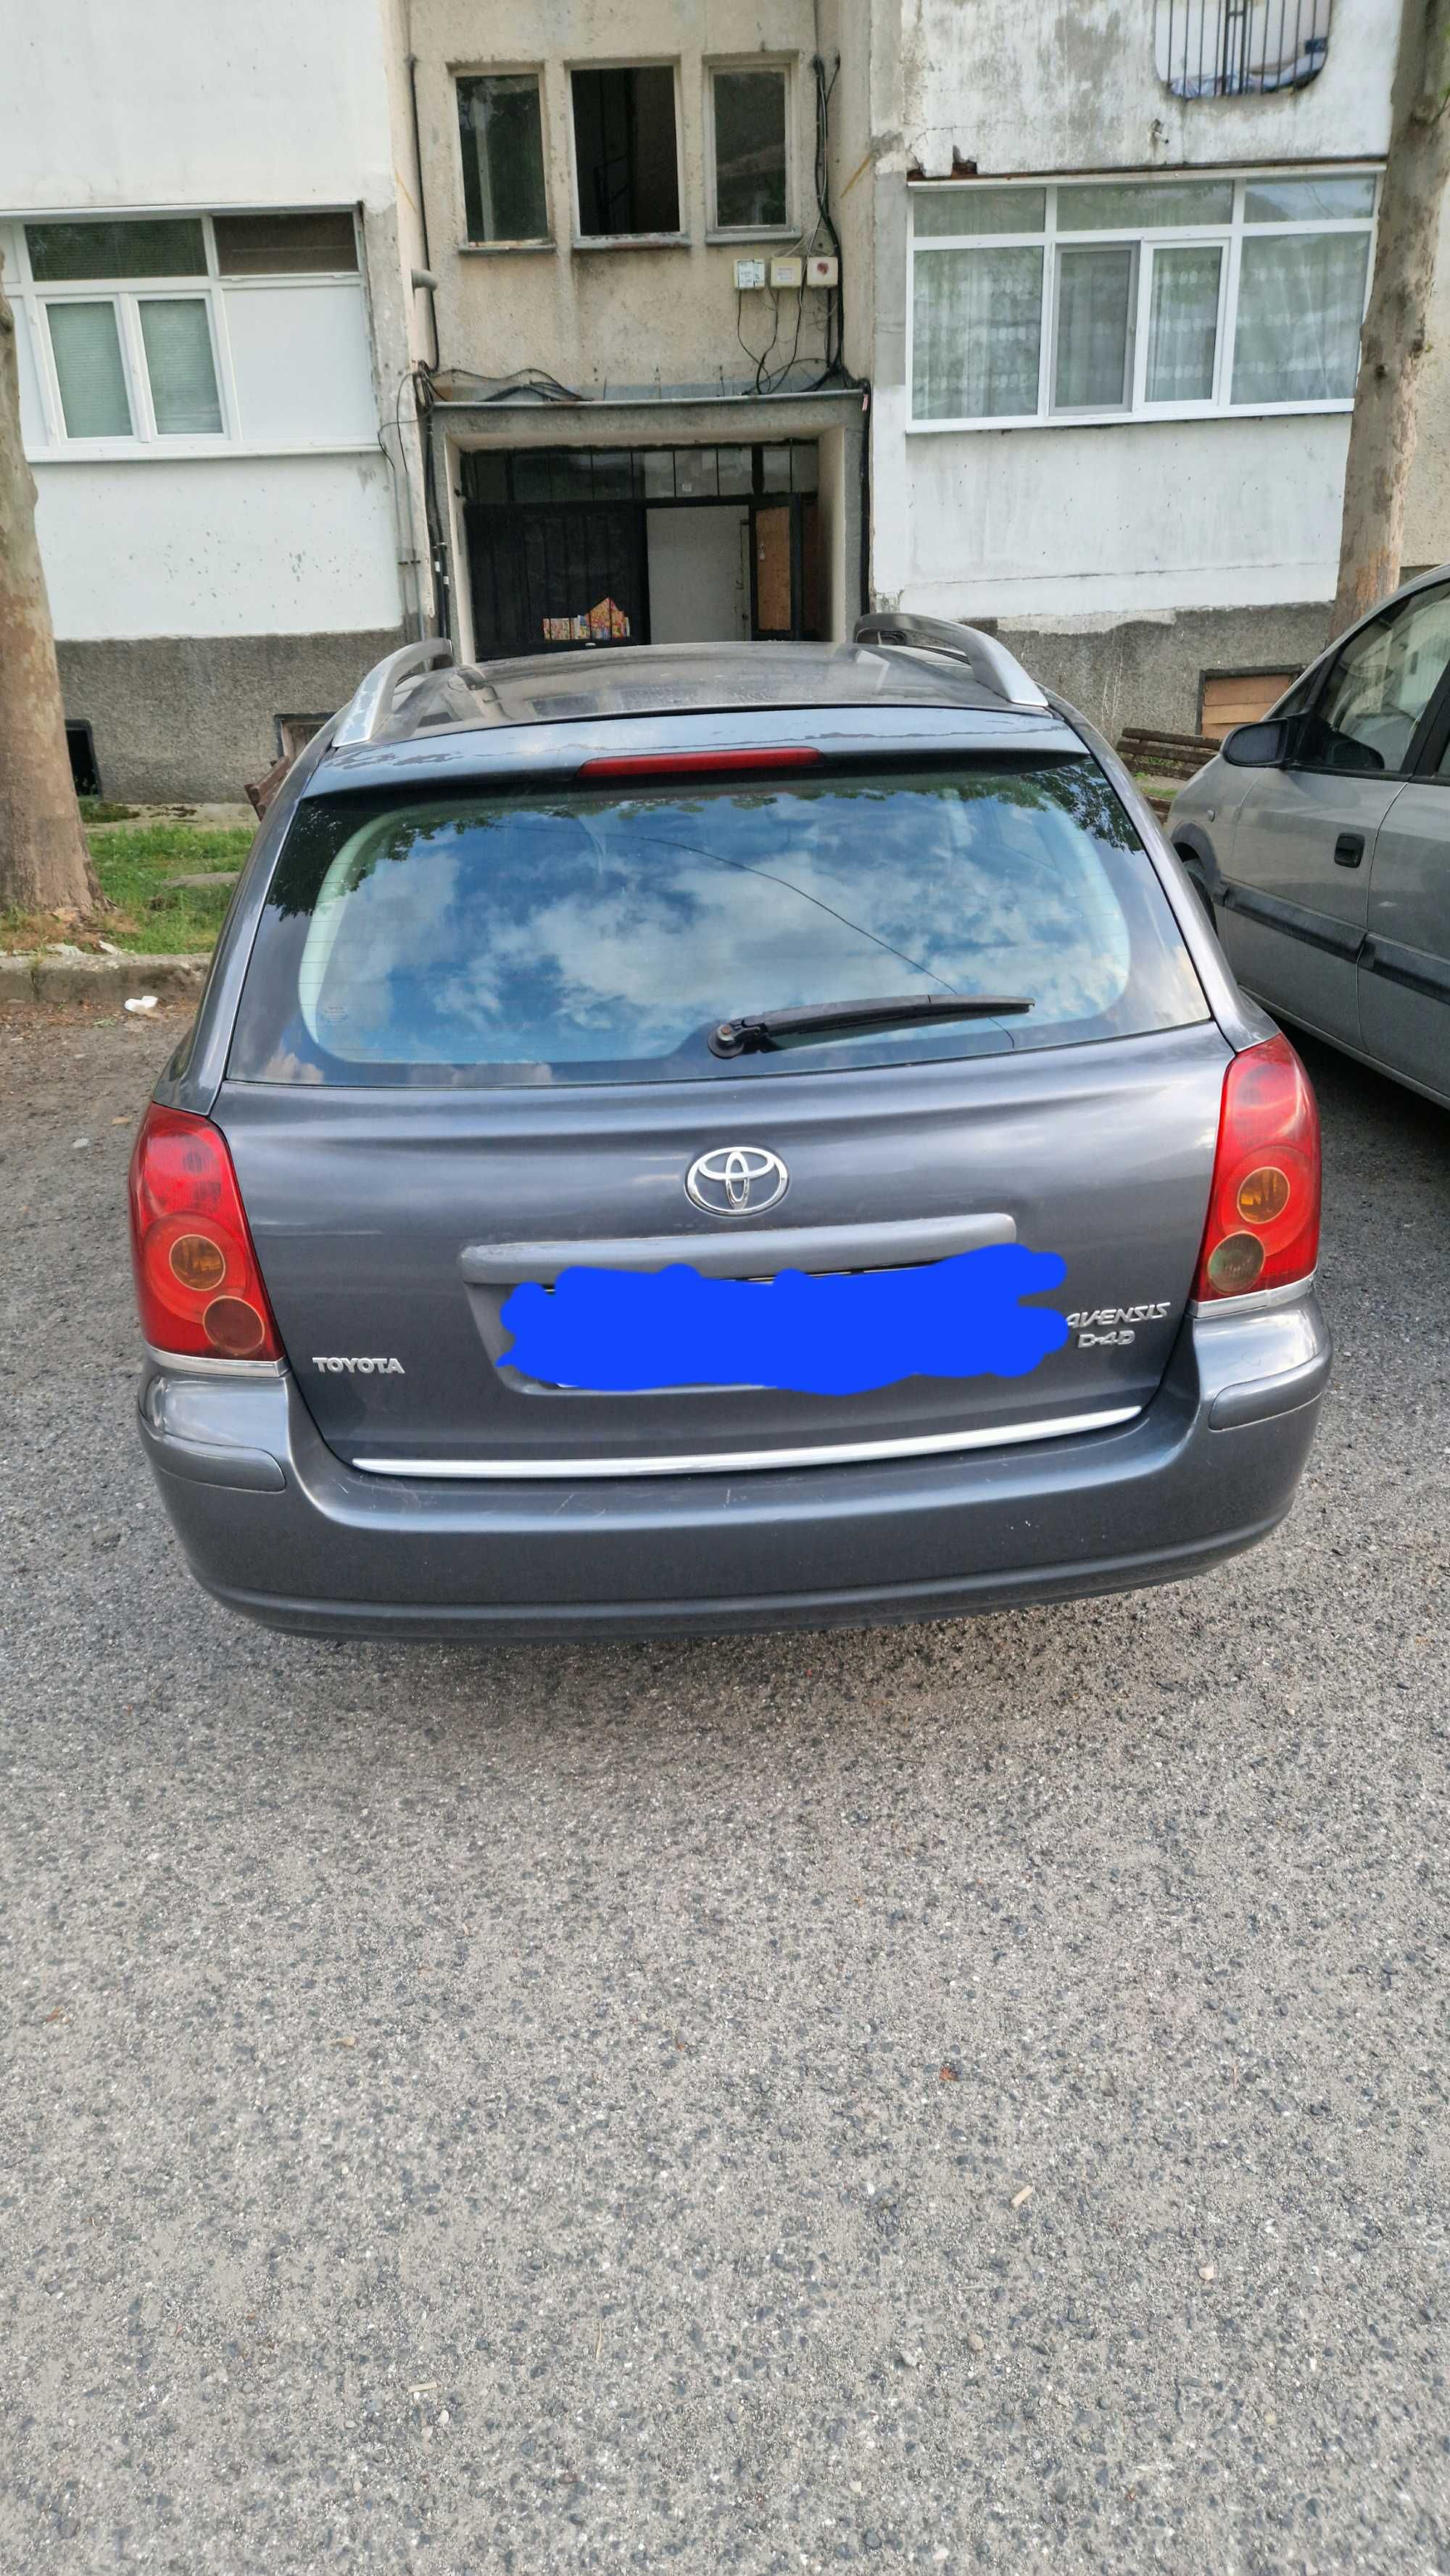 Toyota Avensis 2.2 150 кс 2005г.